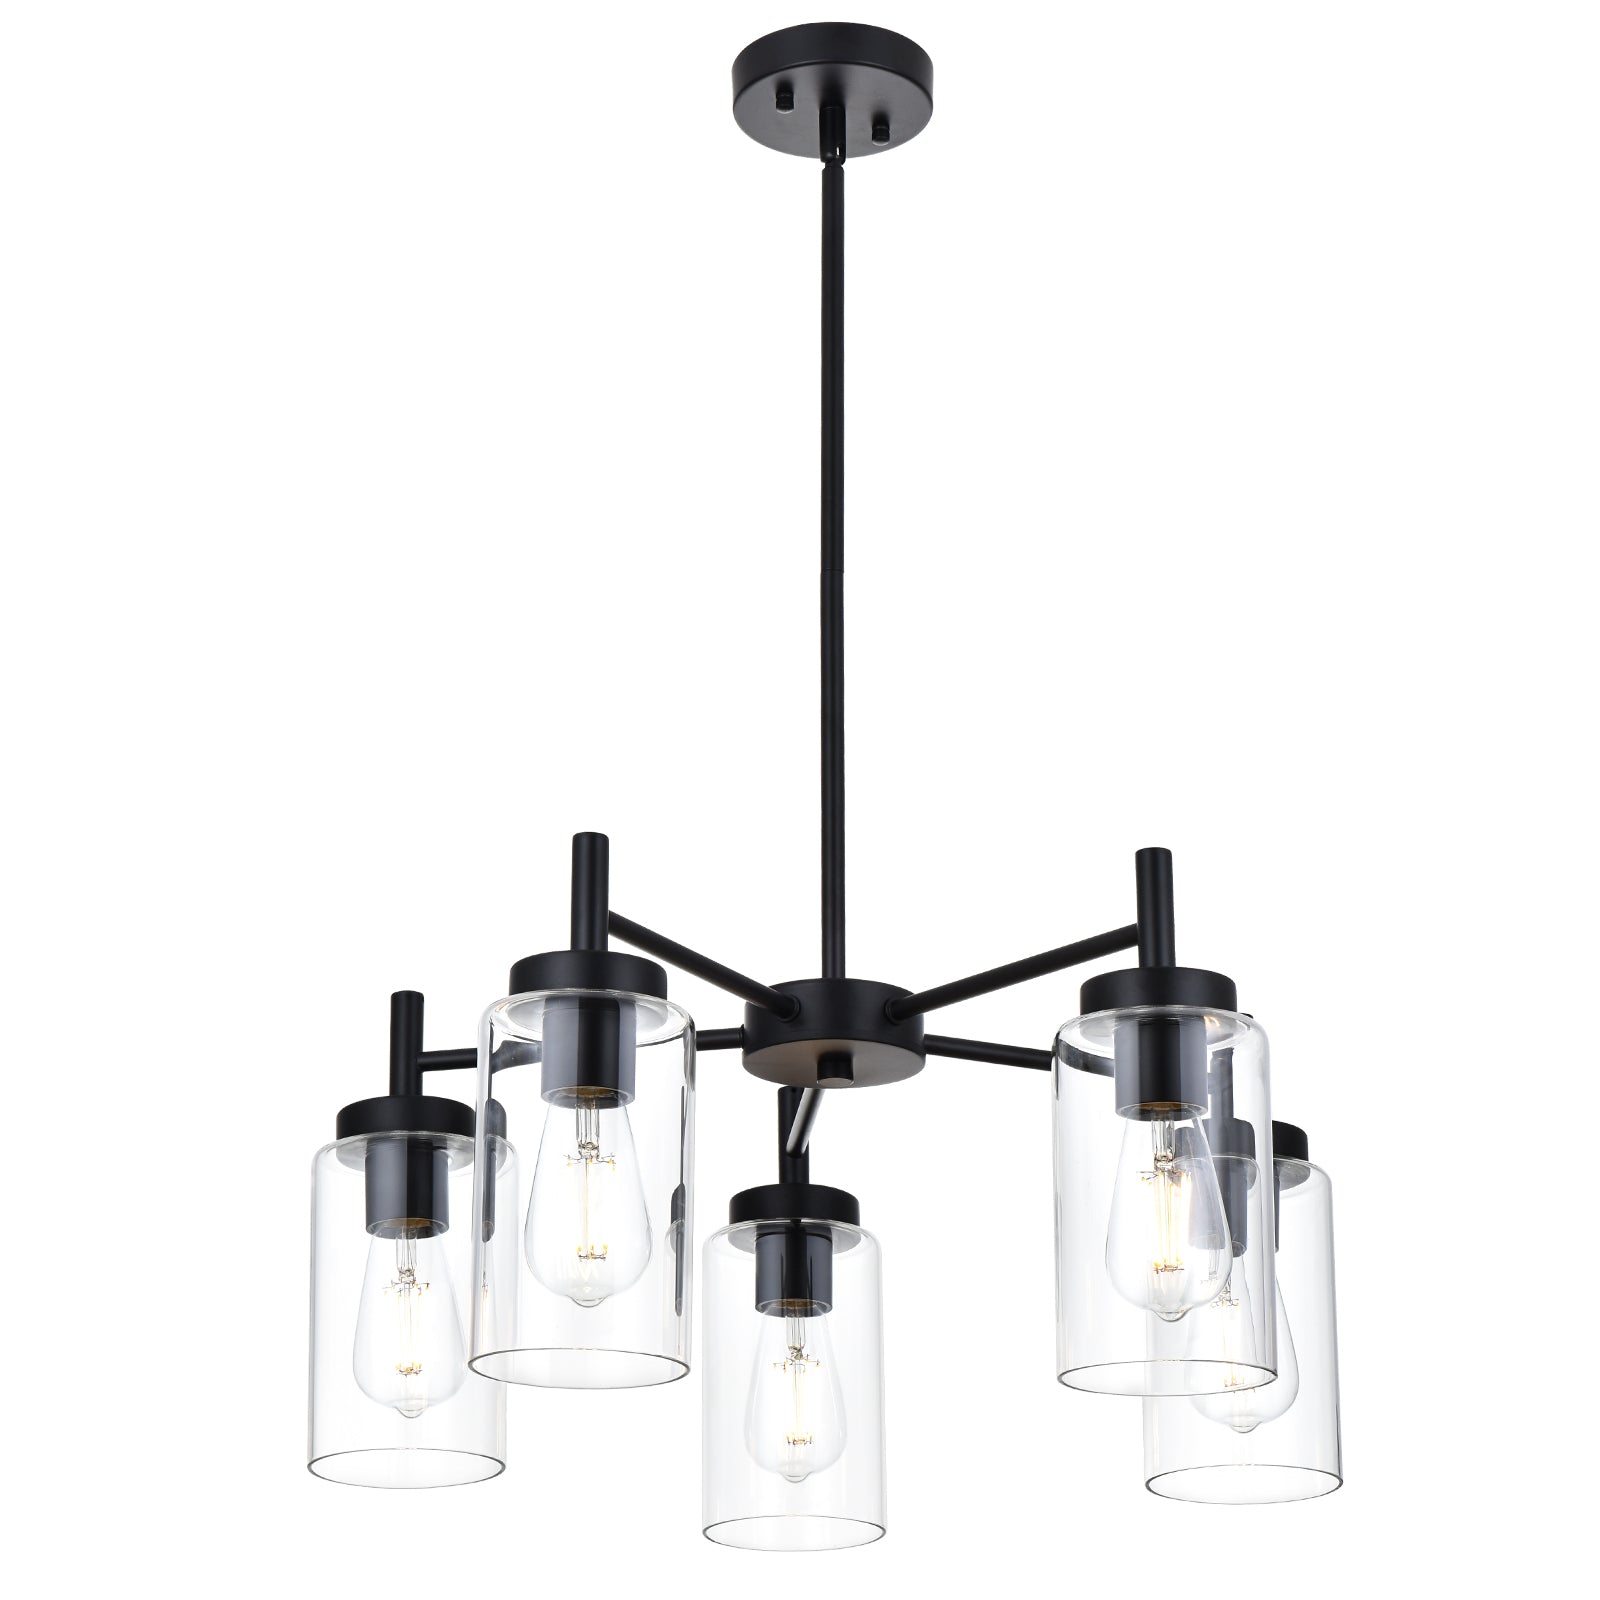 Contemporary 5-Light Large Chandeliers Oil Rubbed Bronze Modern Lighting Fixtures Hanging Clear Glass Shades Pendant Lighting for Dining Room Living Room Kitchen